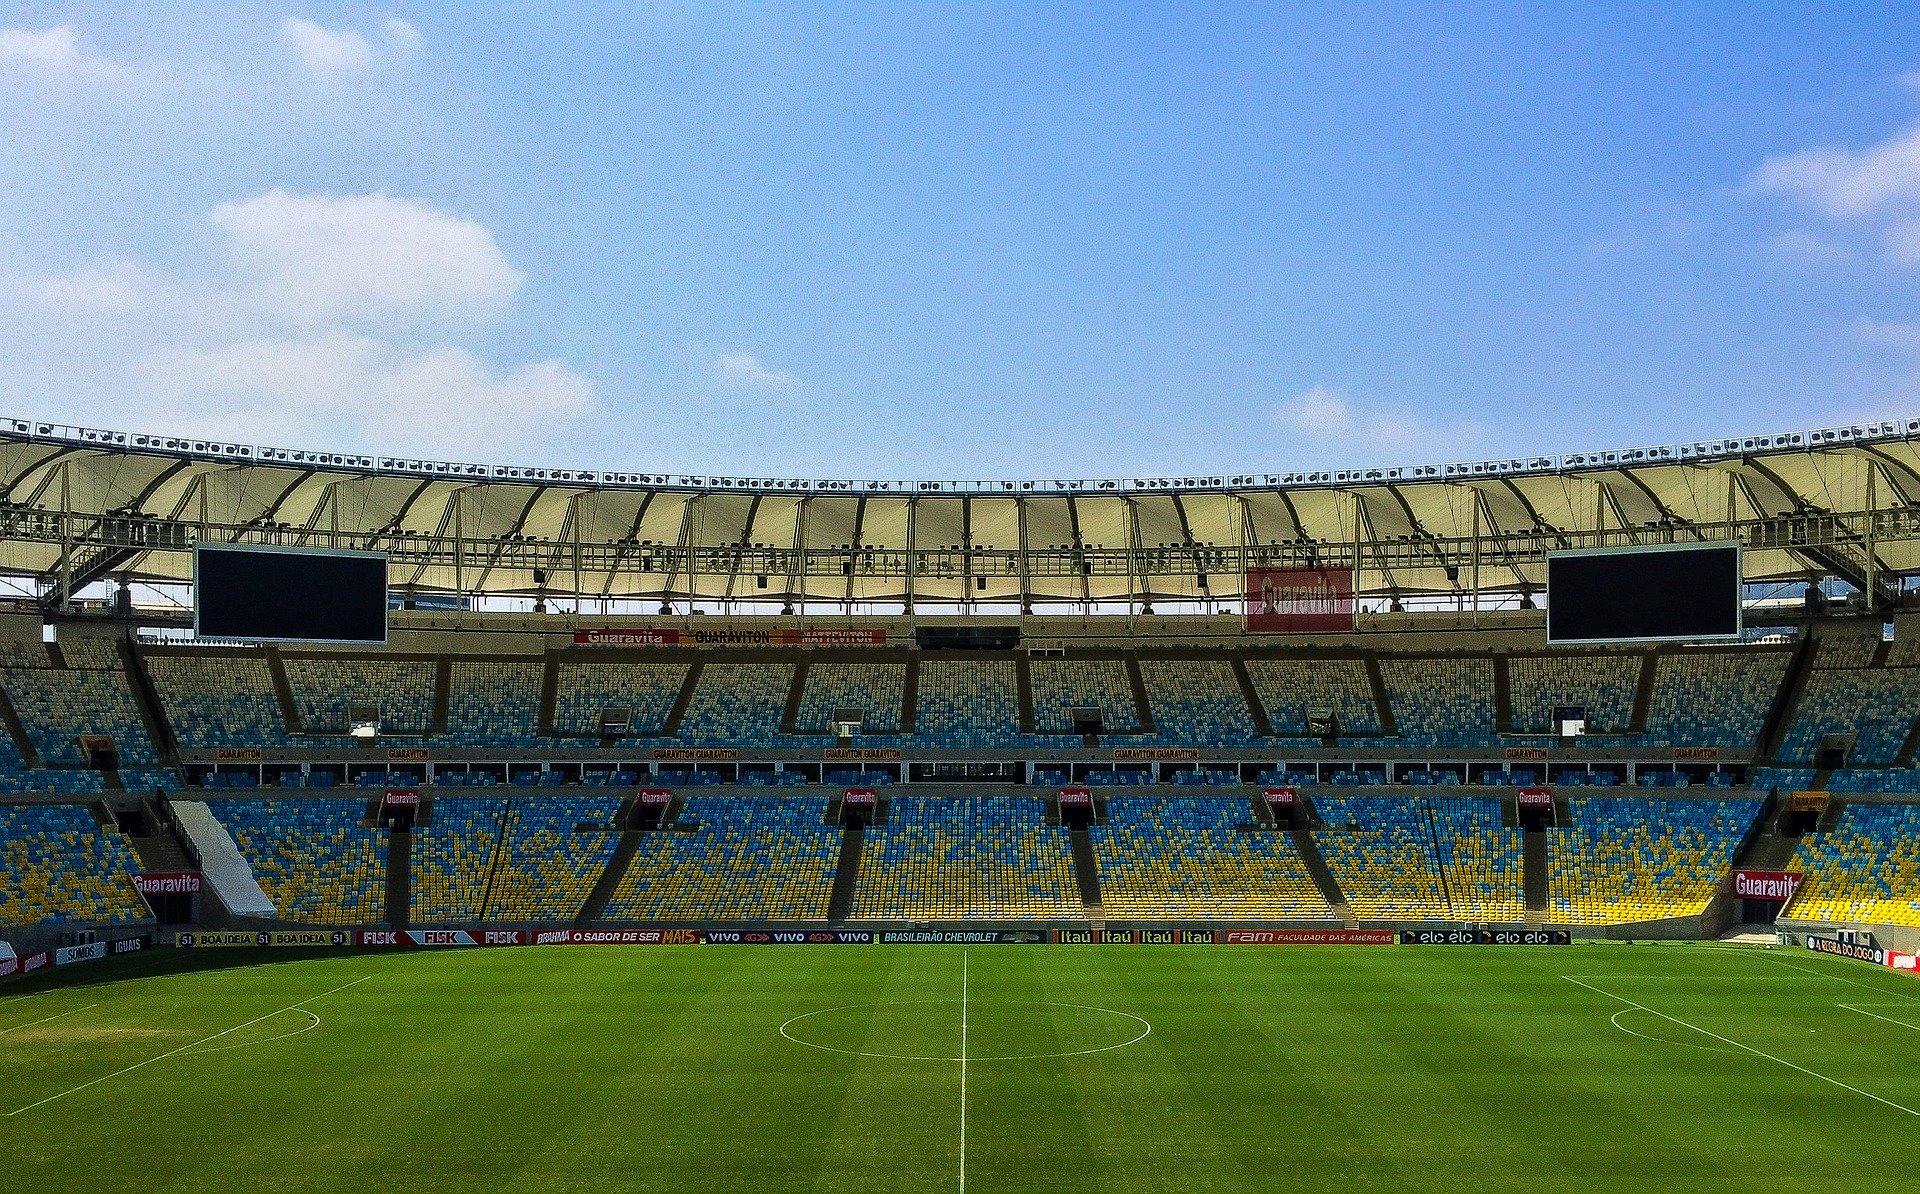 An empty stadium, which is set to become a familiar sight under Coronavirus restrictions